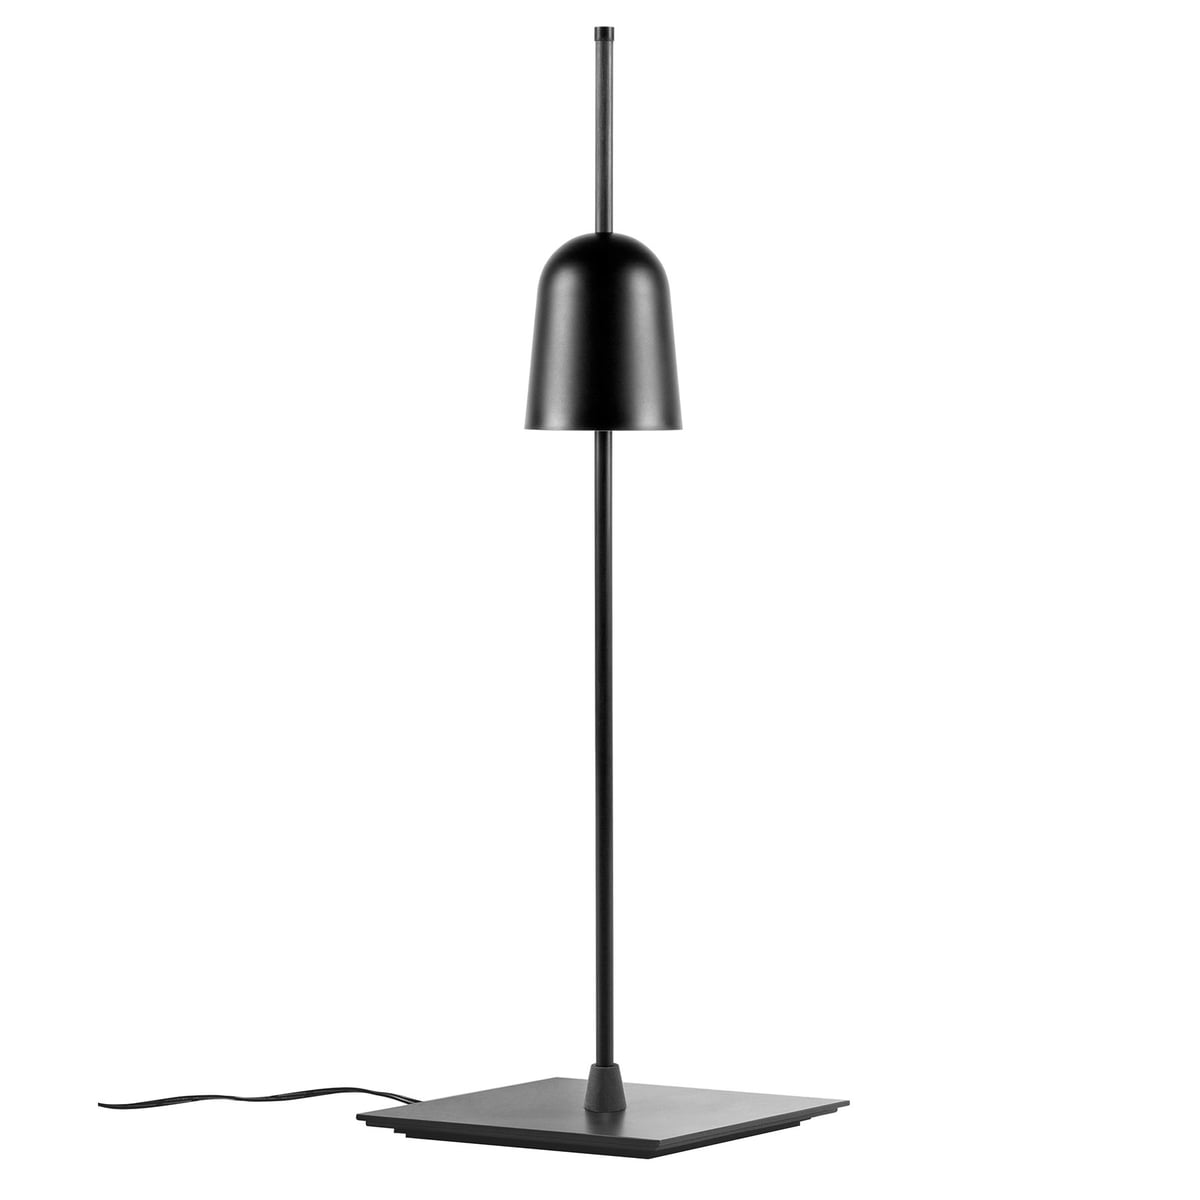 Ascent Table Lamp by Luceplan in the shop